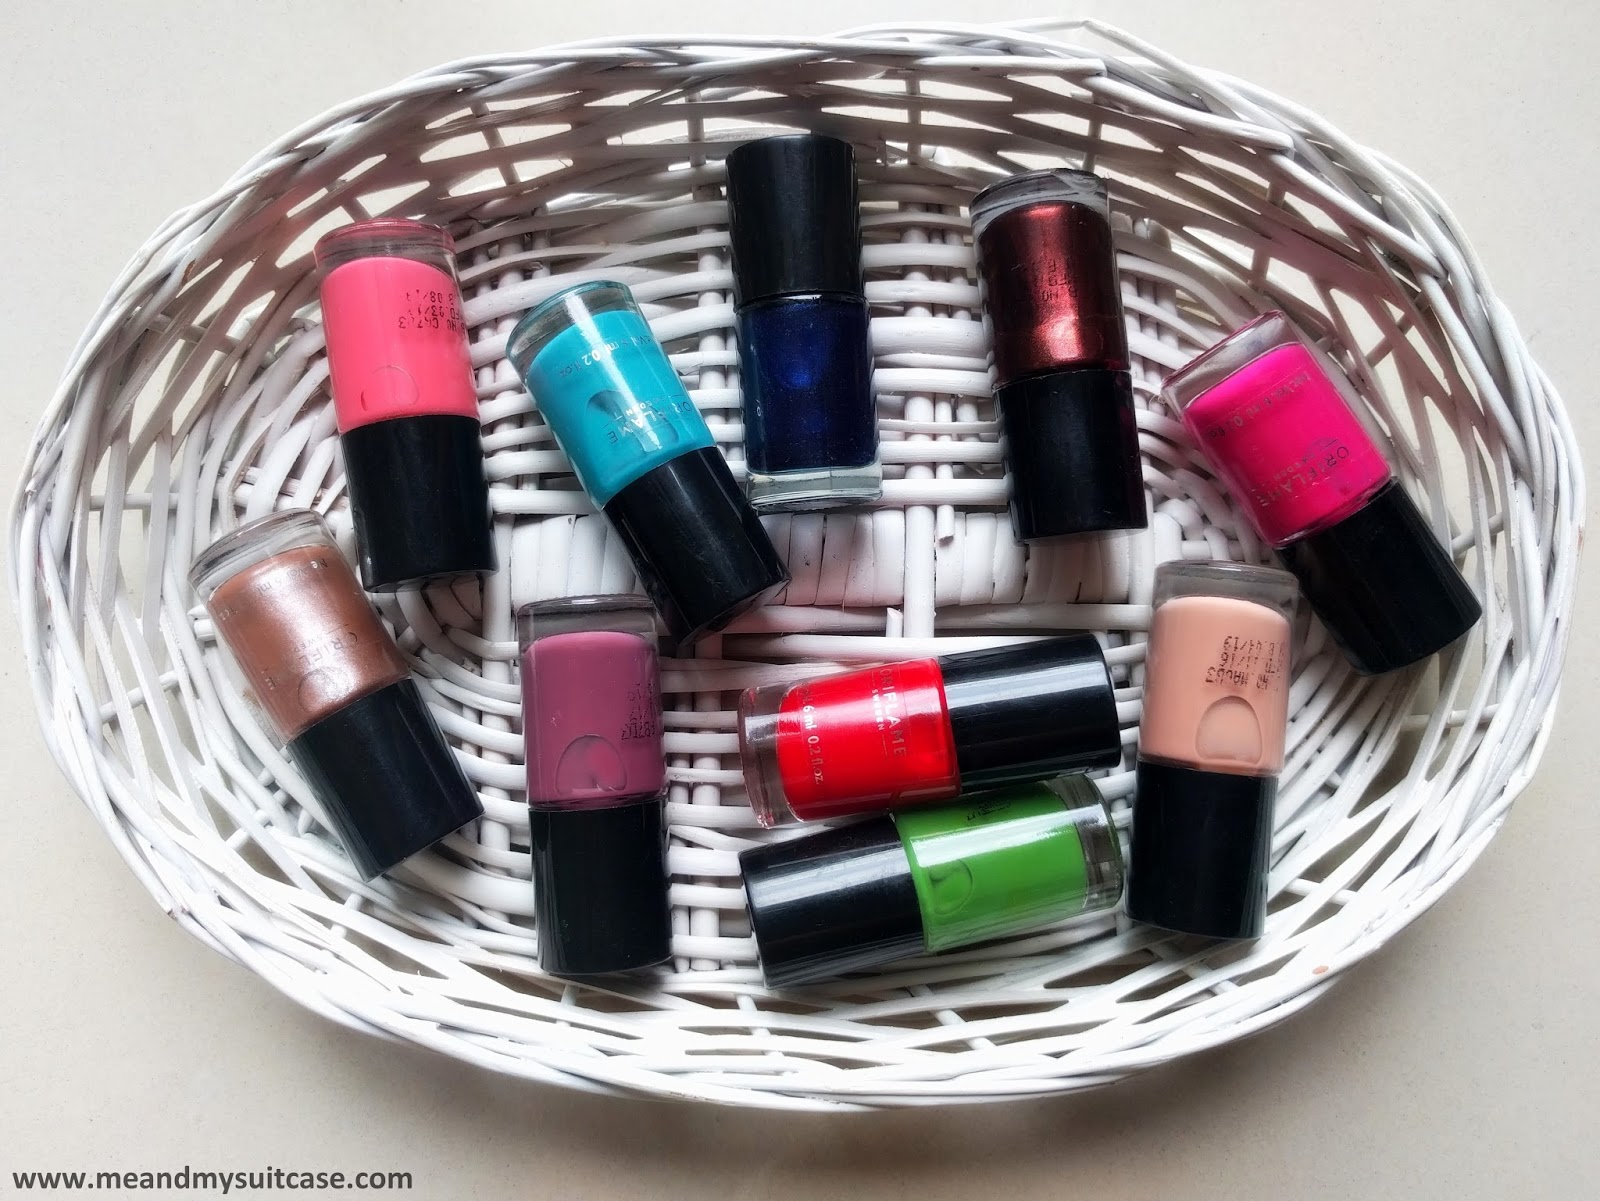 Oriflame - Our Colourbox nail polishes are available in your favourite  colours (5) to match your everyday outfits :) They are light in weight,  have a medium-sized brush to ensure there is